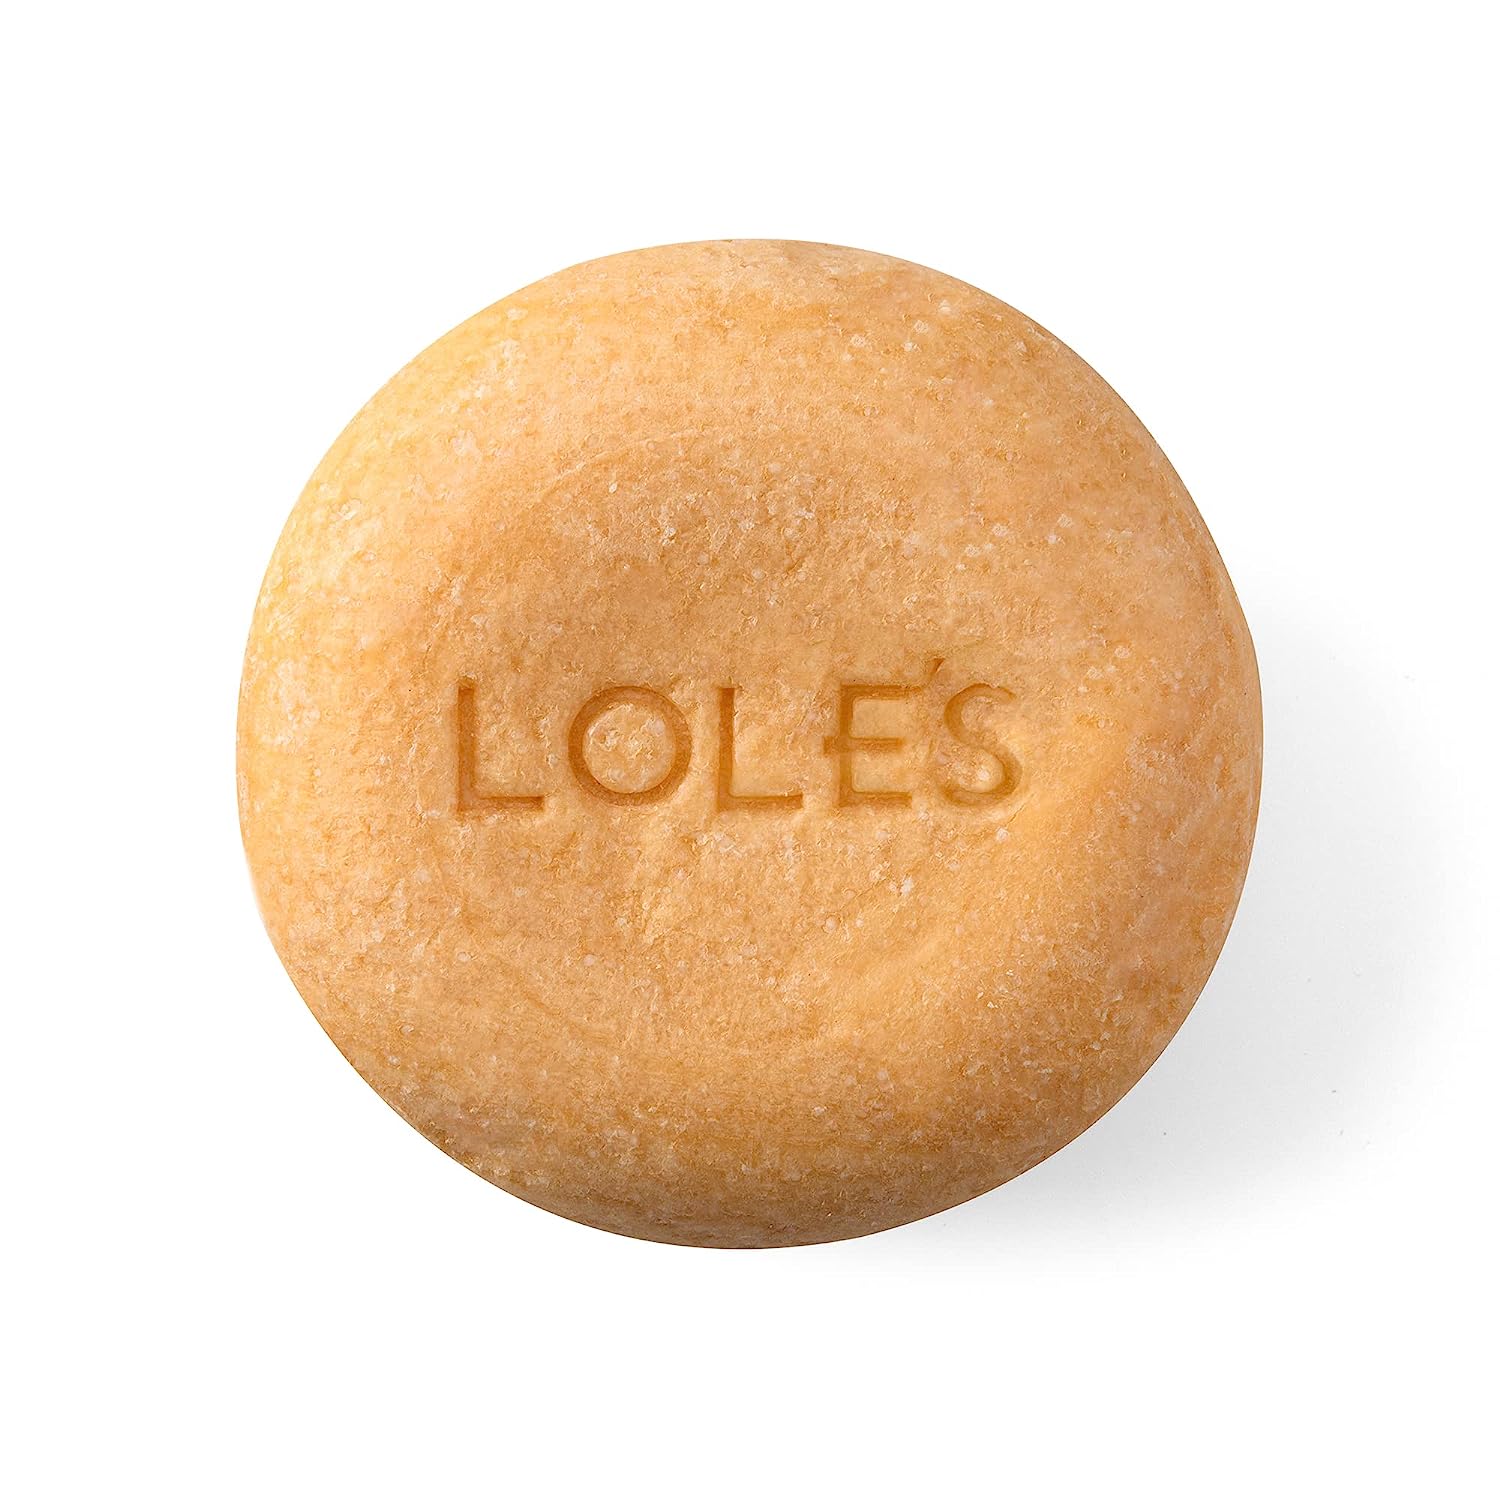 LOLE'S Shampoo Bar & Conditioner 2in1 with Almond Oil [...]